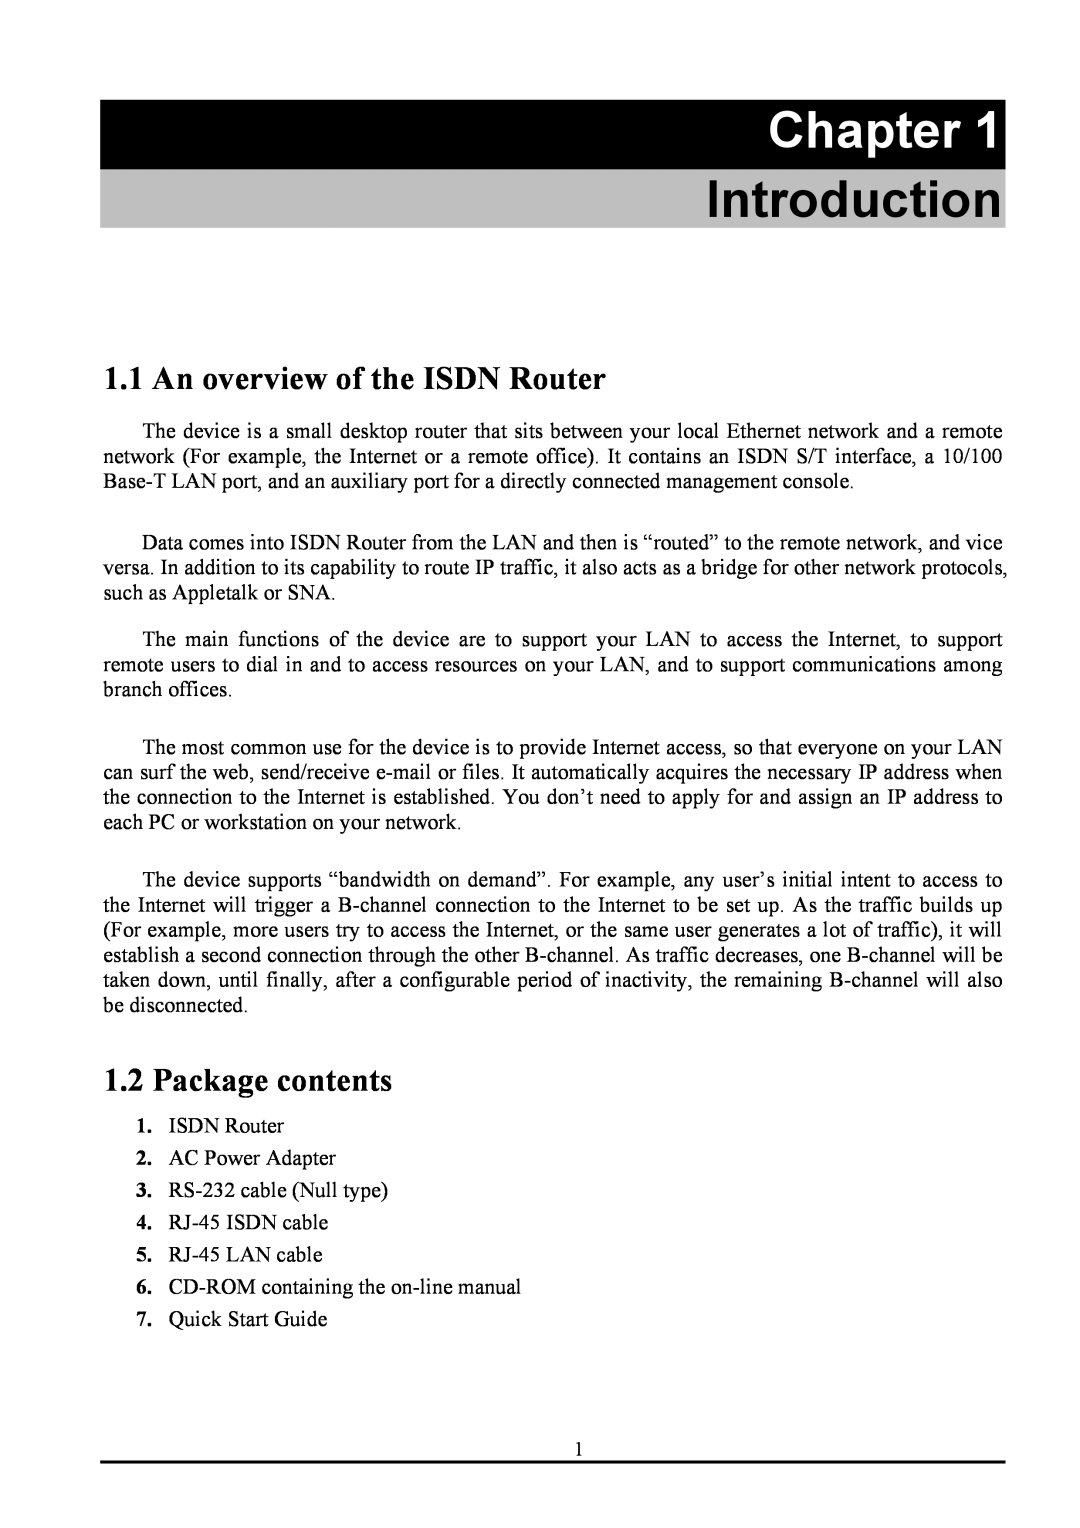 Atlantis Land ATLMMR MNE01 user manual Chapter, Introduction, An overview of the ISDN Router, Package contents 